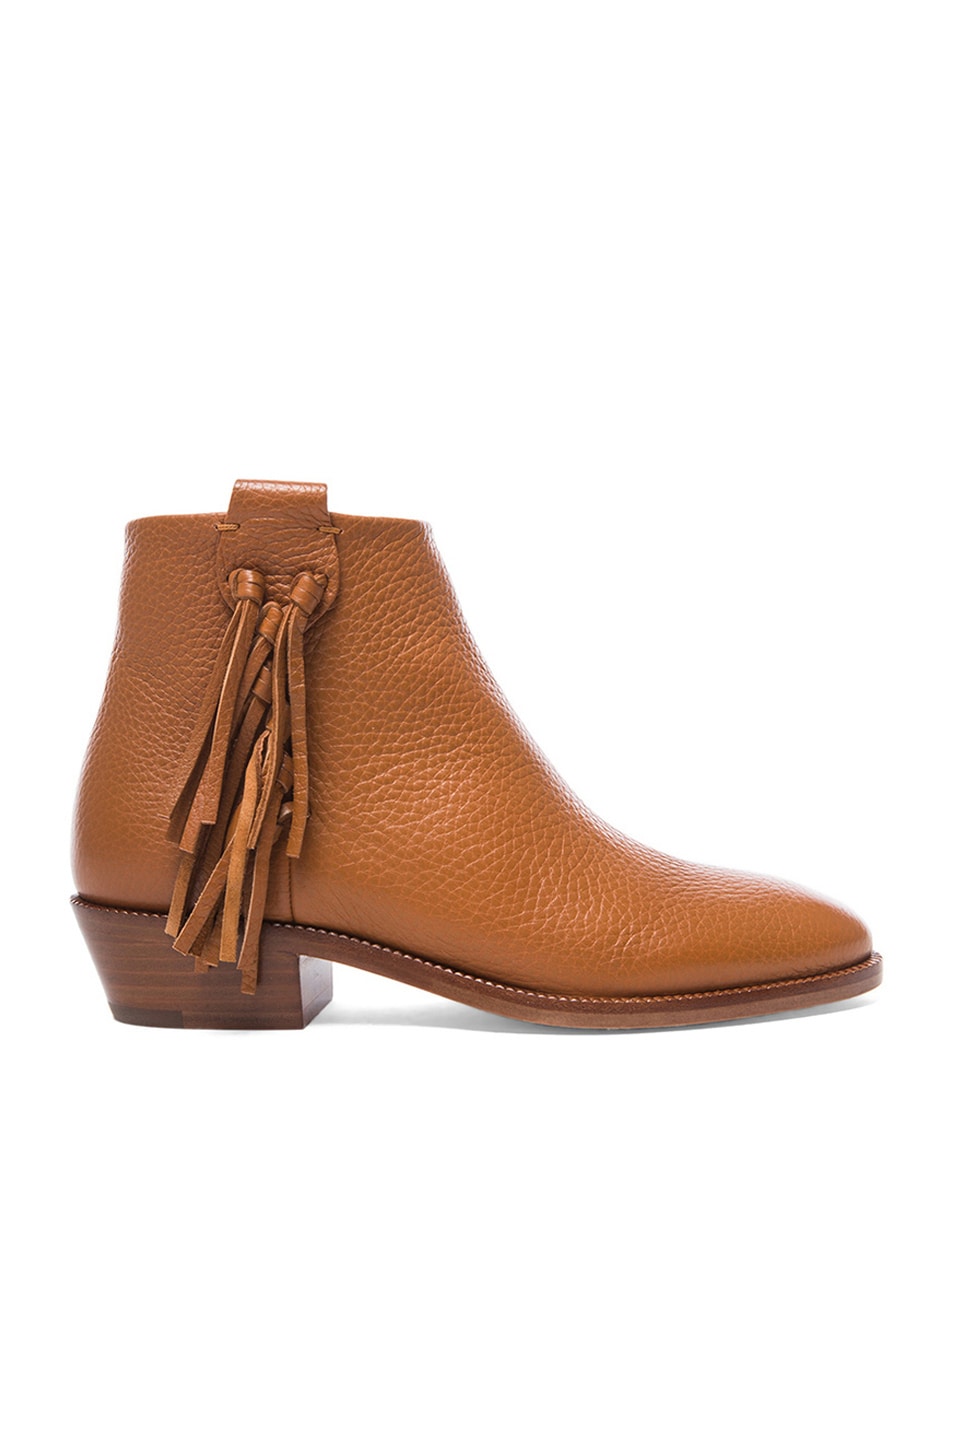 Image 1 of Valentino Garavani Fringe Grained Leather Ankle Boots in Light Cuir